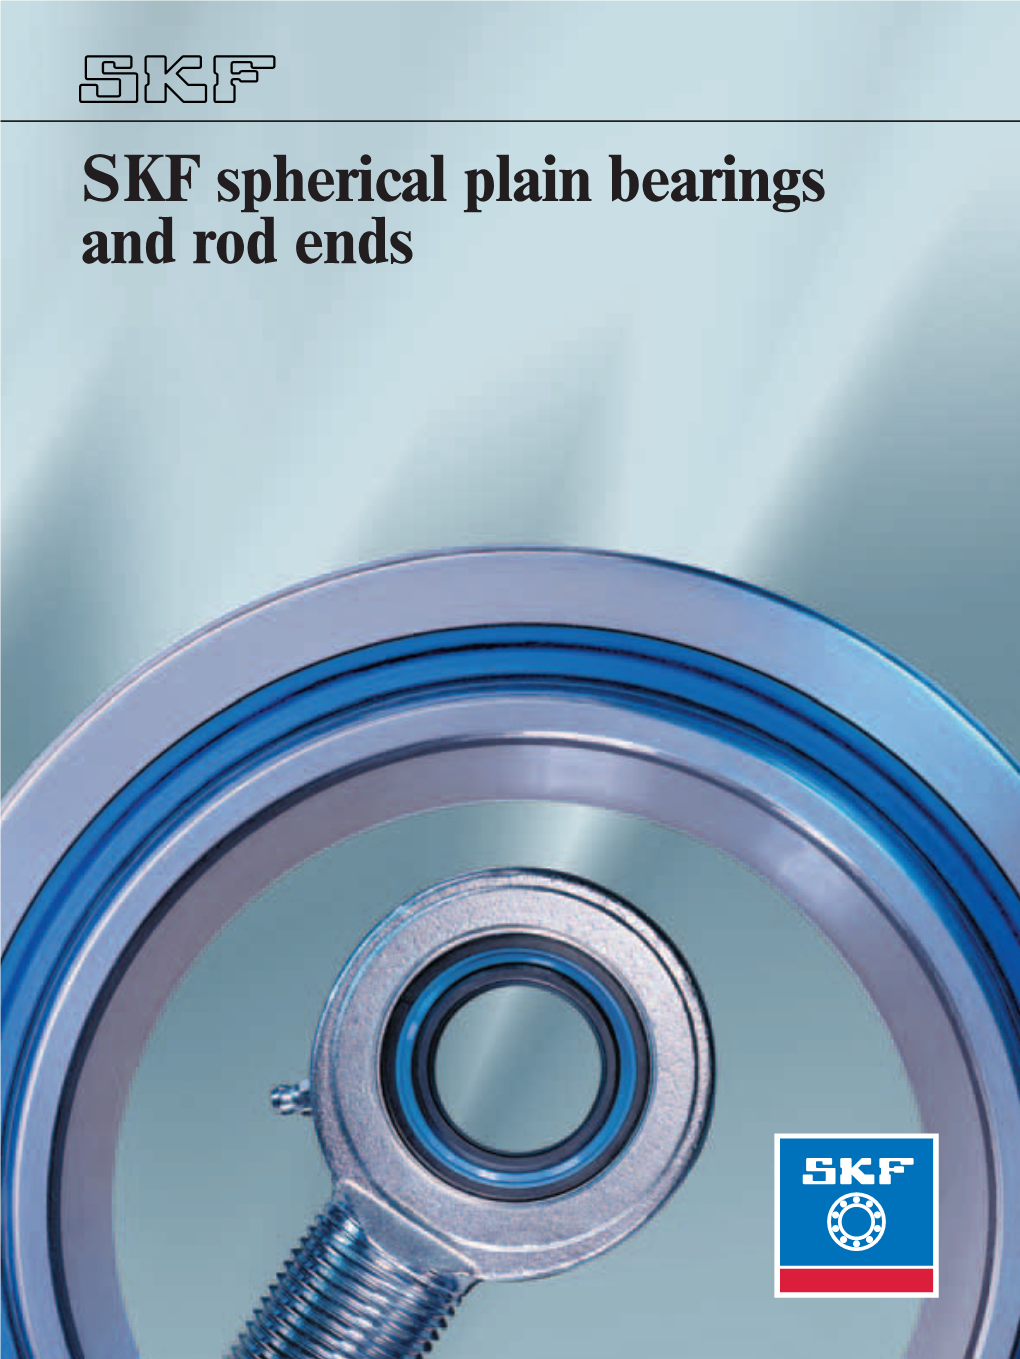 SKF Spherical Plain Bearings and Rod Ends Contents